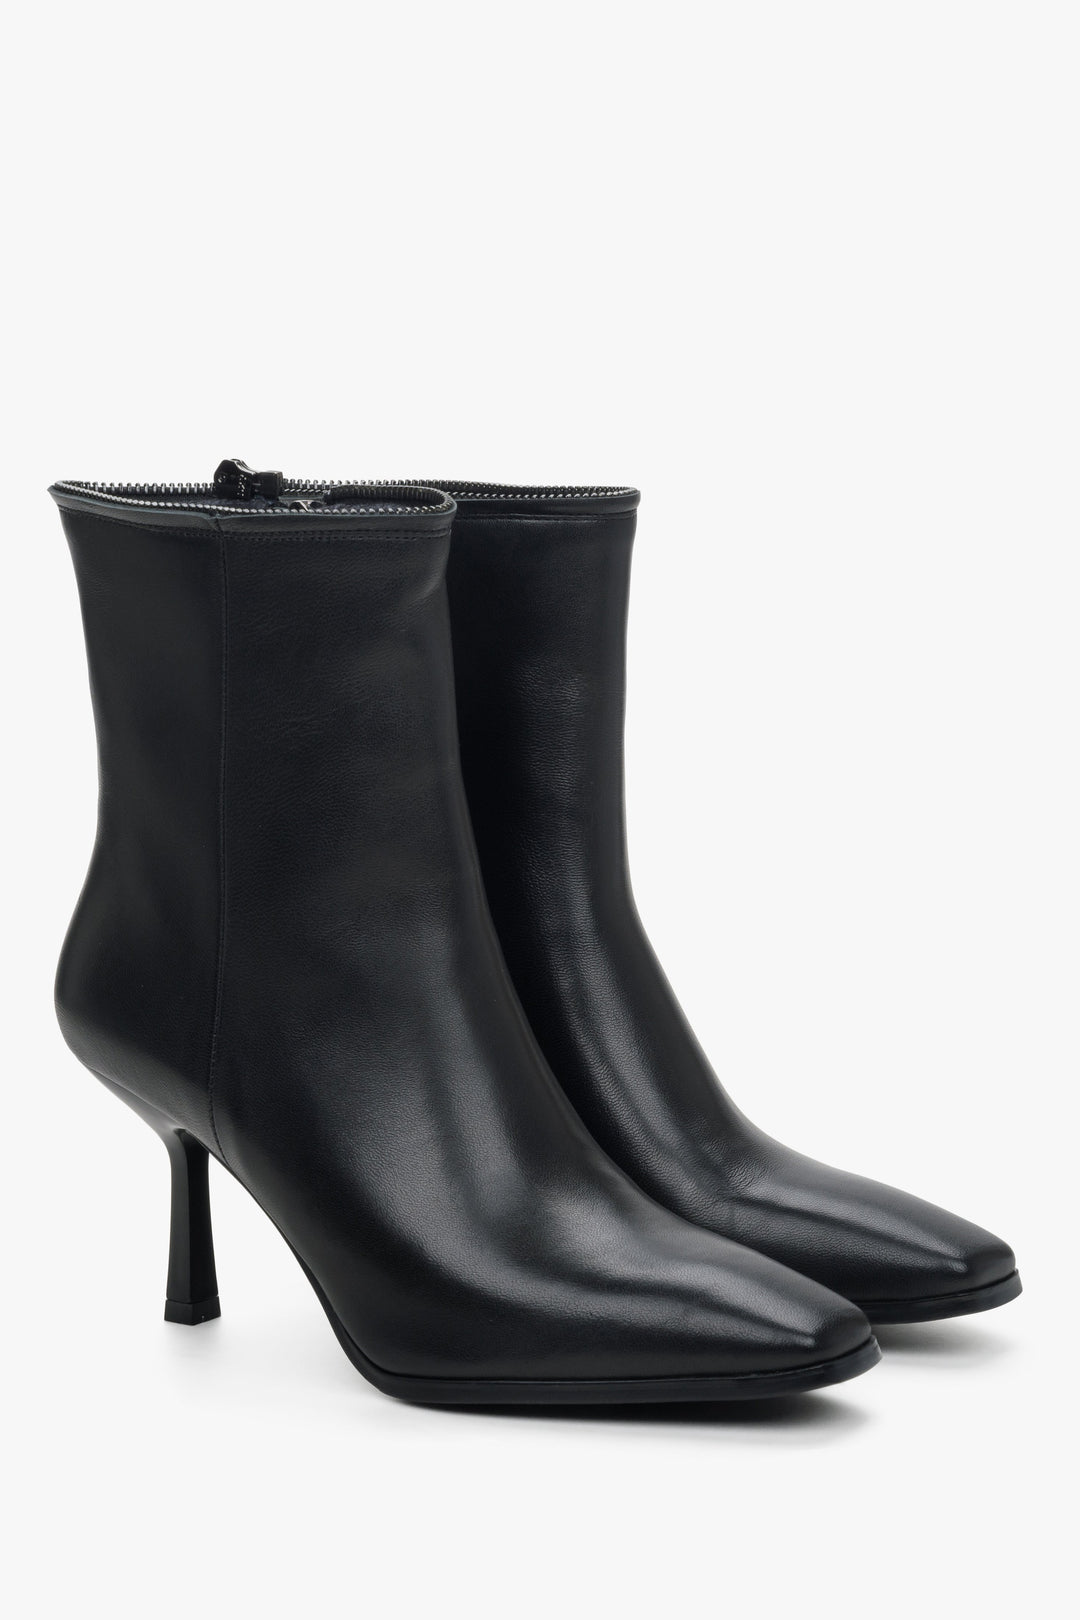 Women's black leather boots by Estro - presentation of the model unfastened.